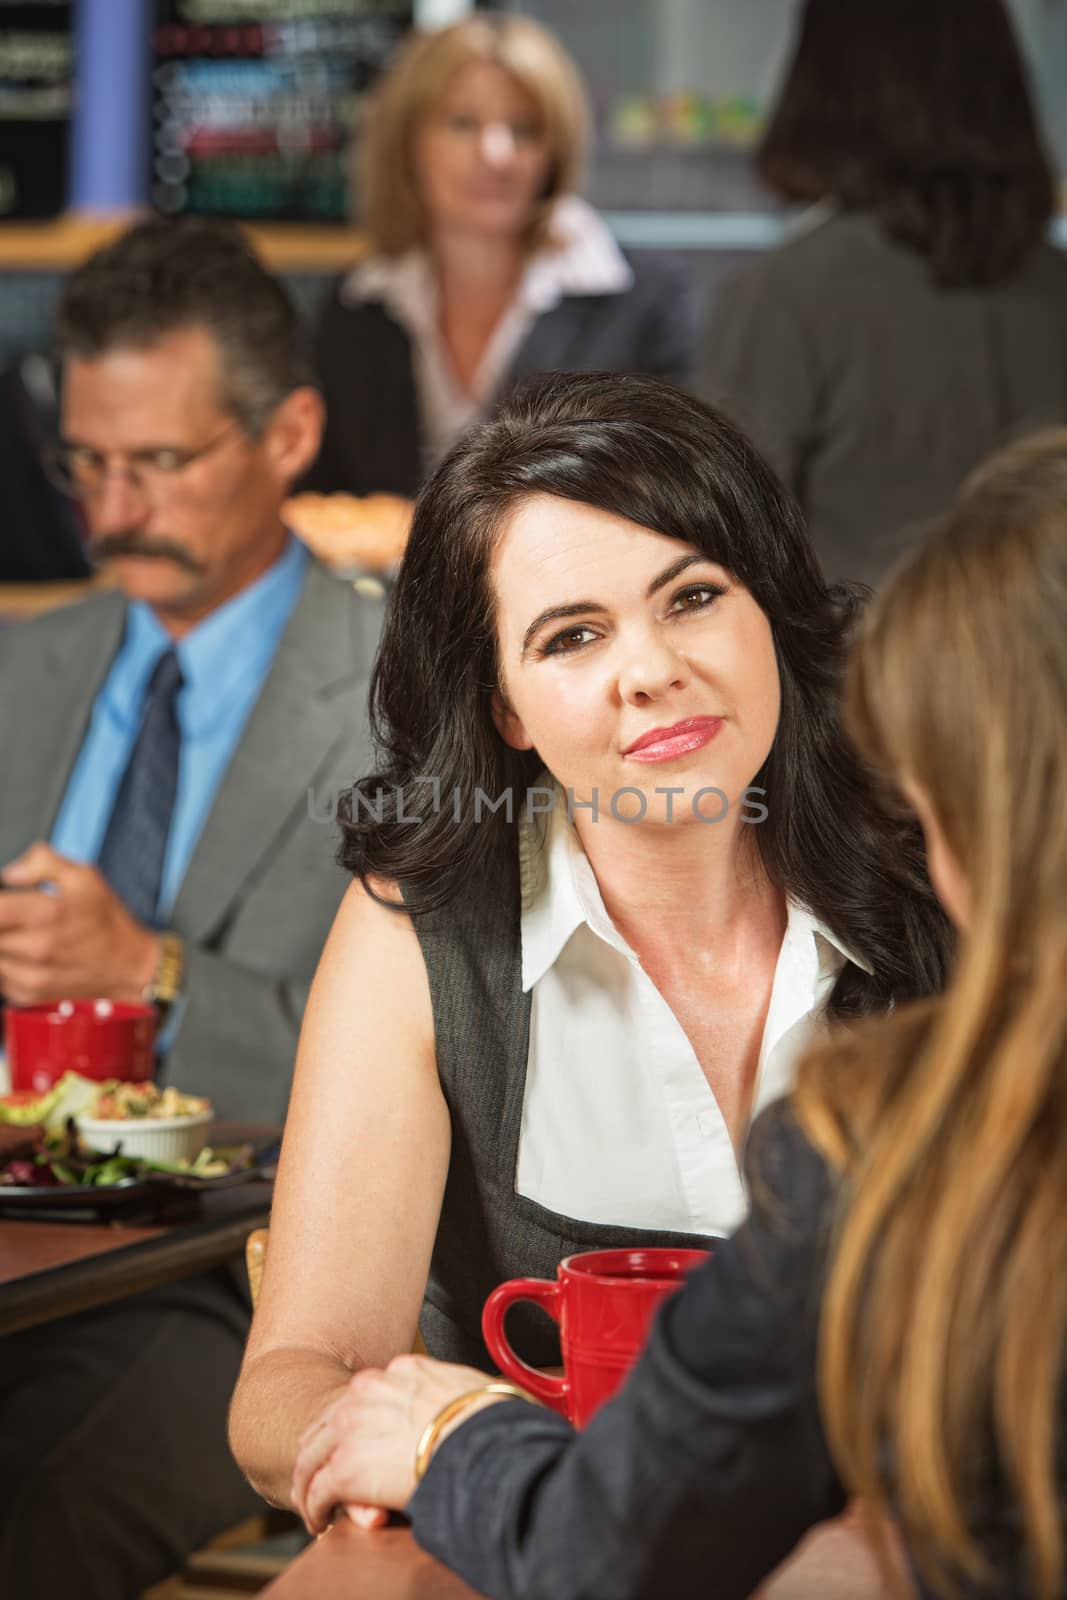 Grinning woman consoled by friend in cafeteria